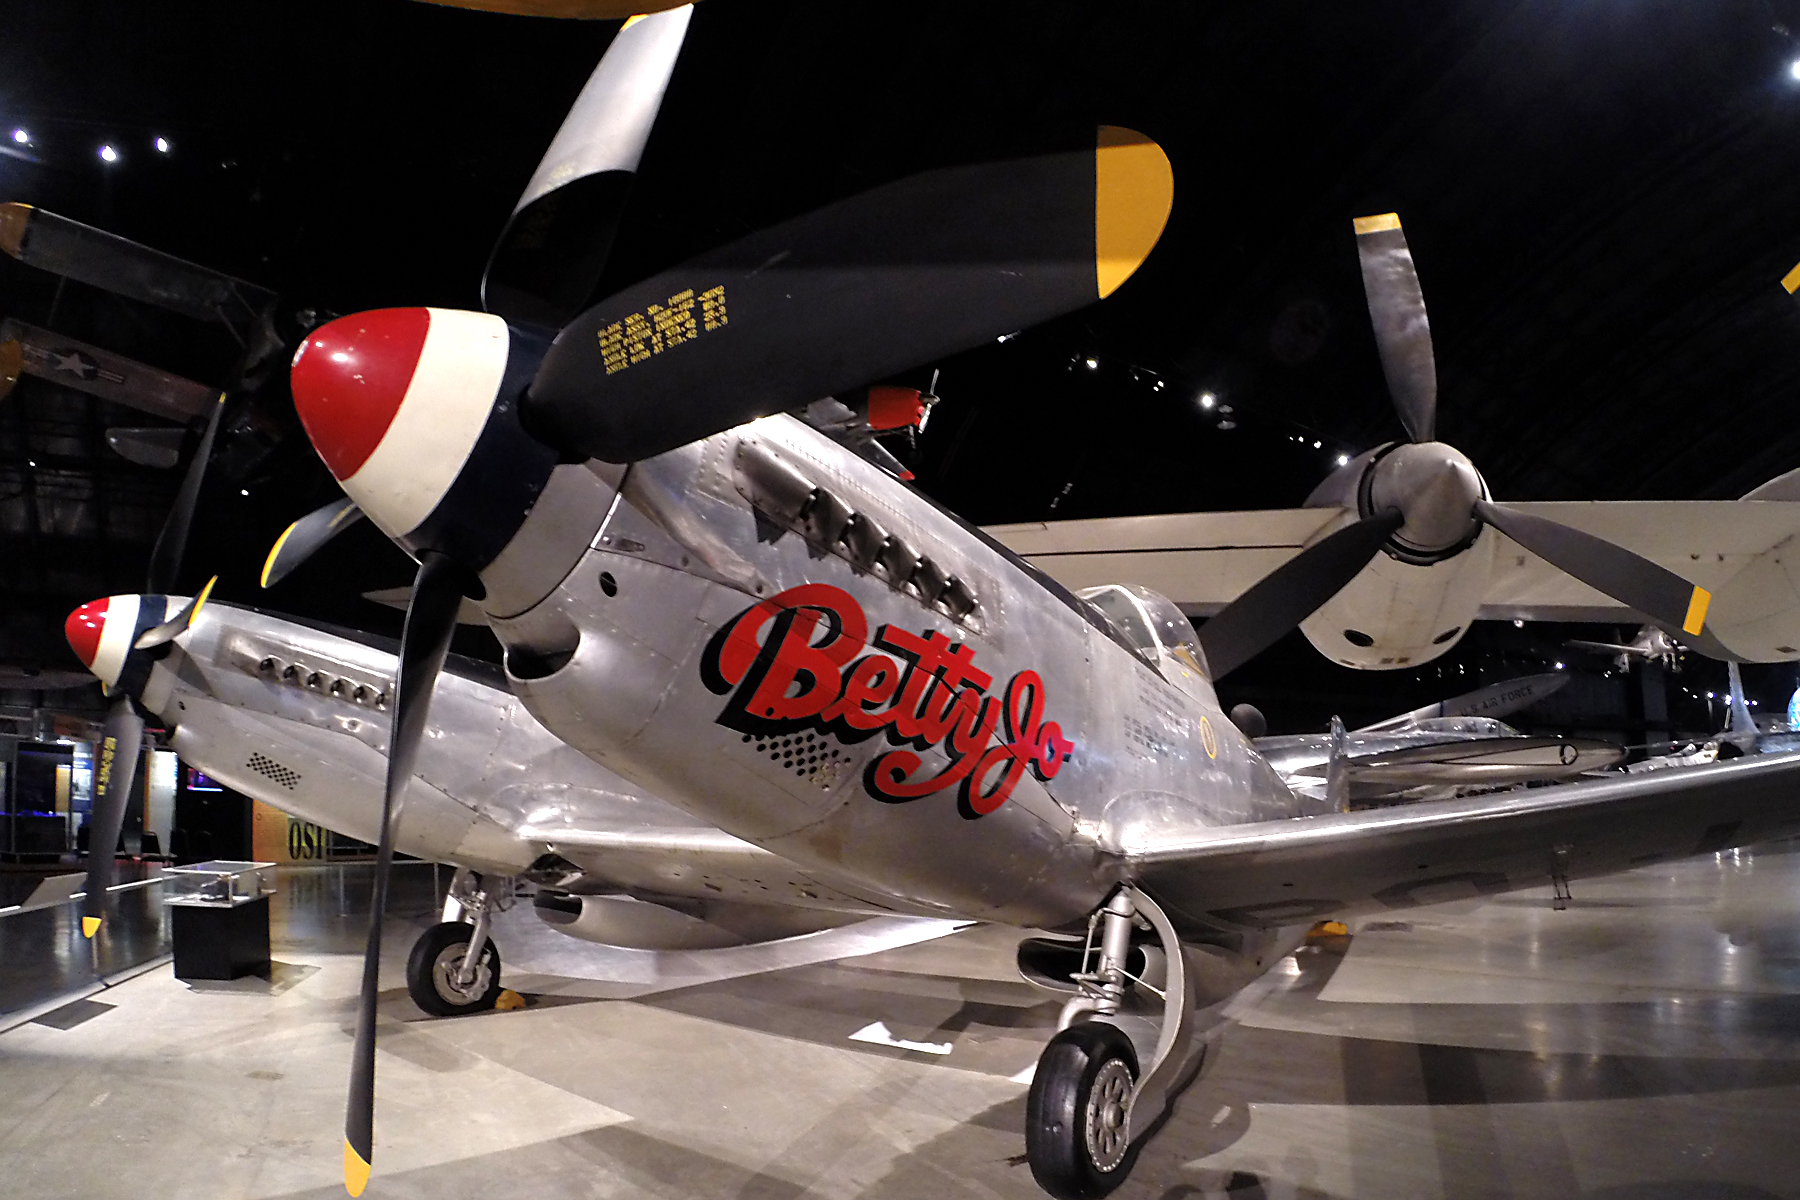 P-51 Mustang: First flight of an Icon > Joint Base San Antonio > News